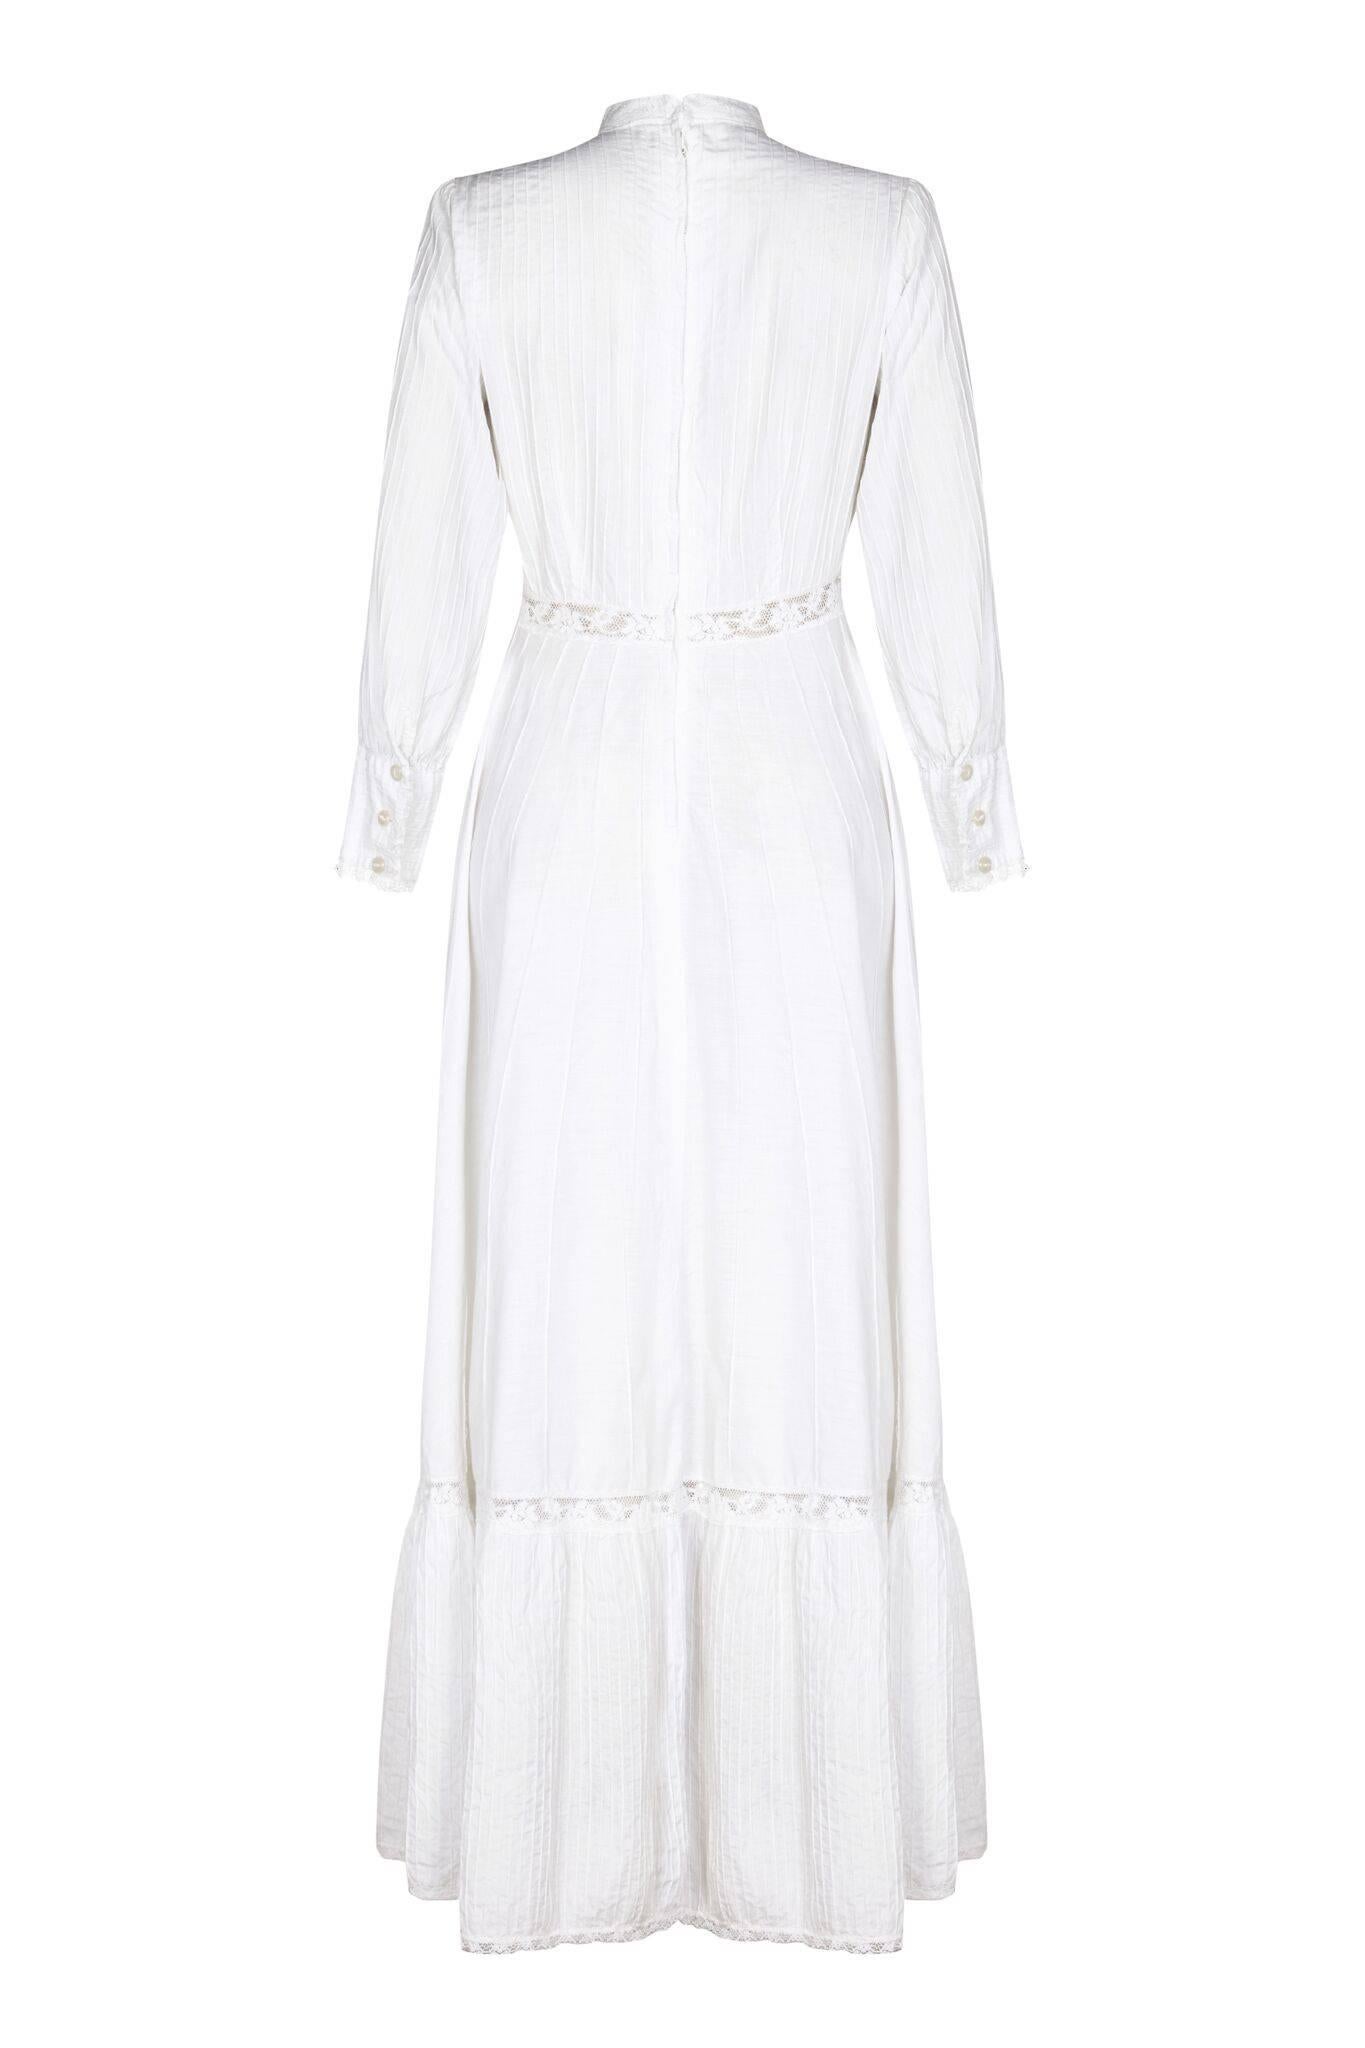 This beautiful 1970s white cotton lawn/prarie dress is in superb condition and is a classic example of the Edwardian/Victorian style that was famously popularised by Laura Ashley during this era. The soft cotton delicate pin-tuck detail is